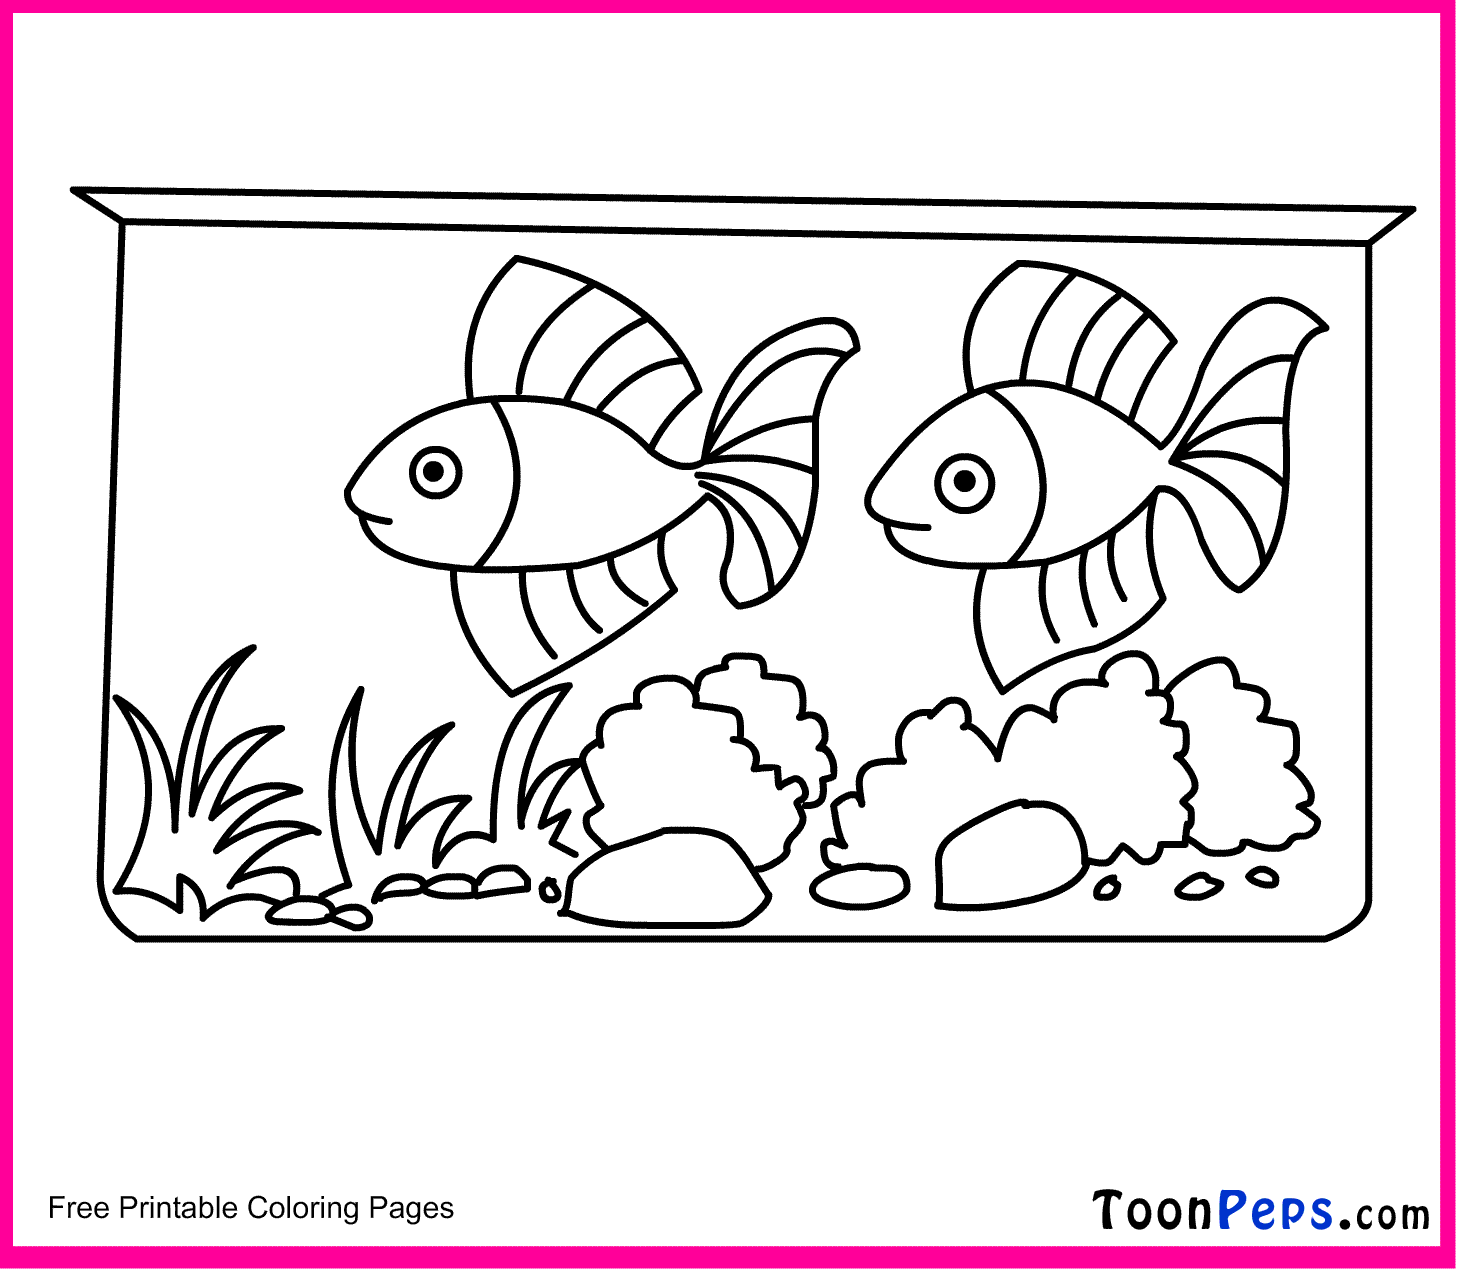 toonpeps : free printable aquarium coloring pages for kids